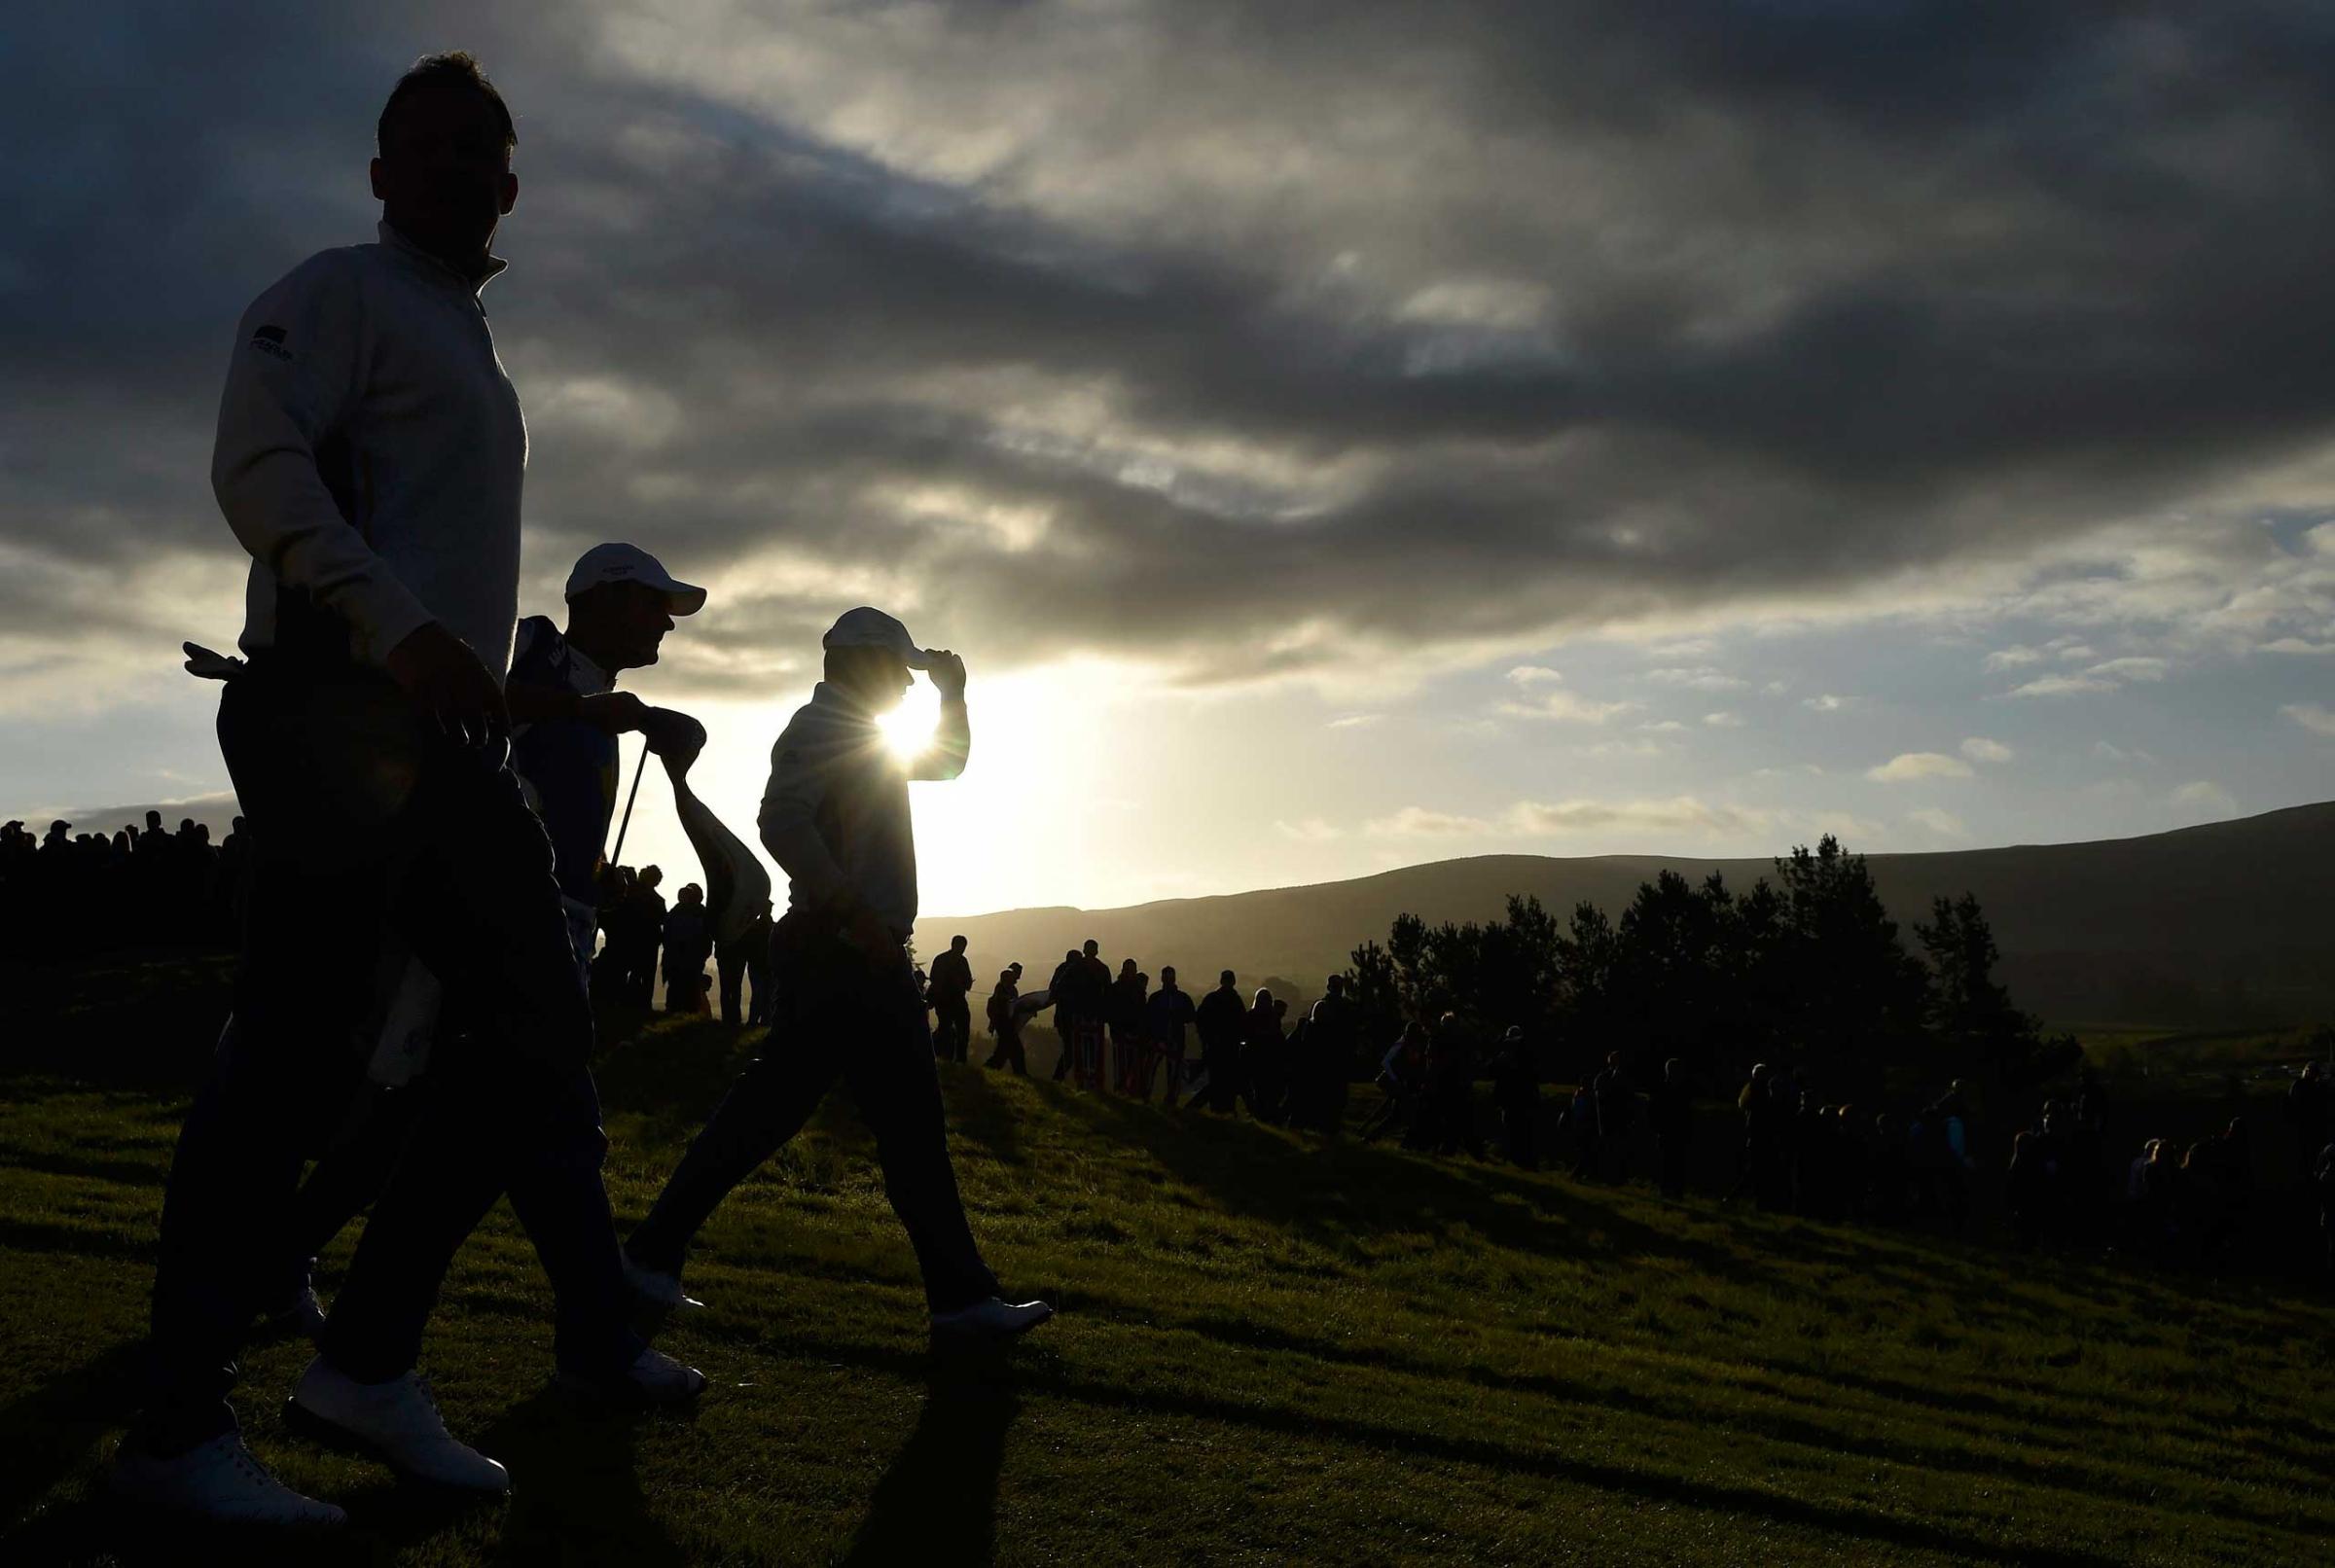 European Ryder Cup players Jamie Donaldson and Lee Westwood walk along the fairway during their fourballs 40th Ryder Cup match at Gleneagles